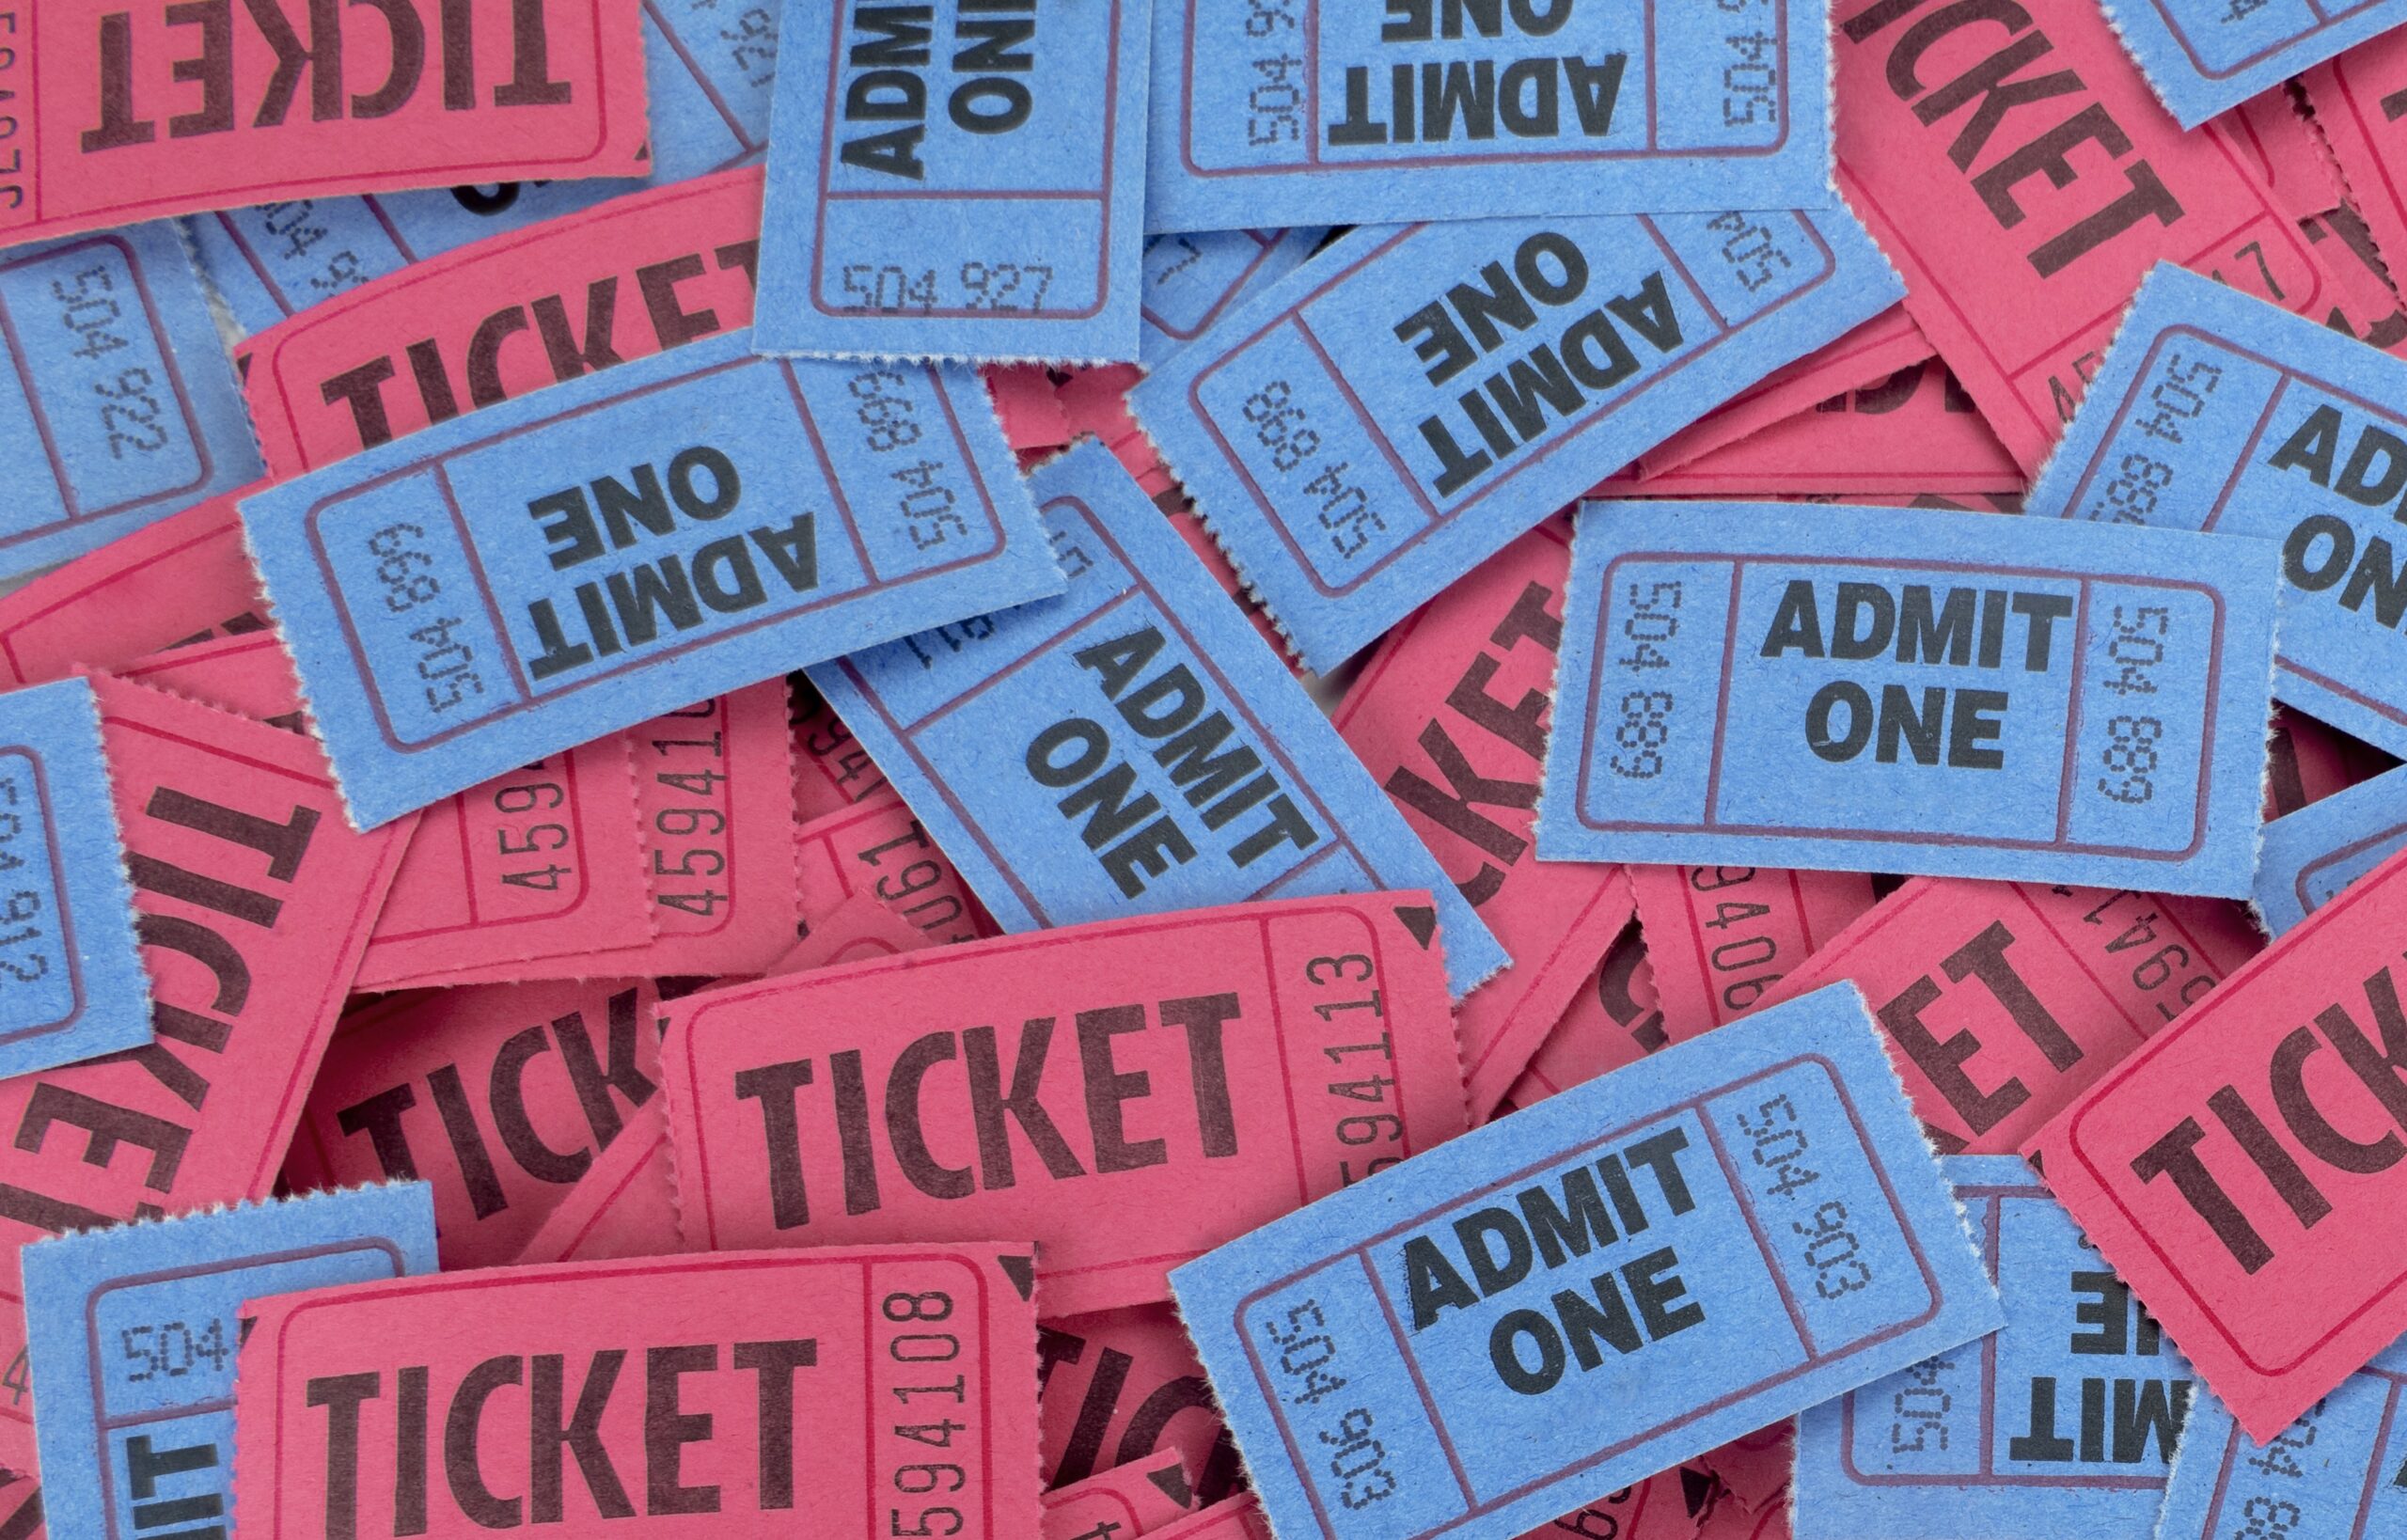 How to outsmart ticket fraudsters